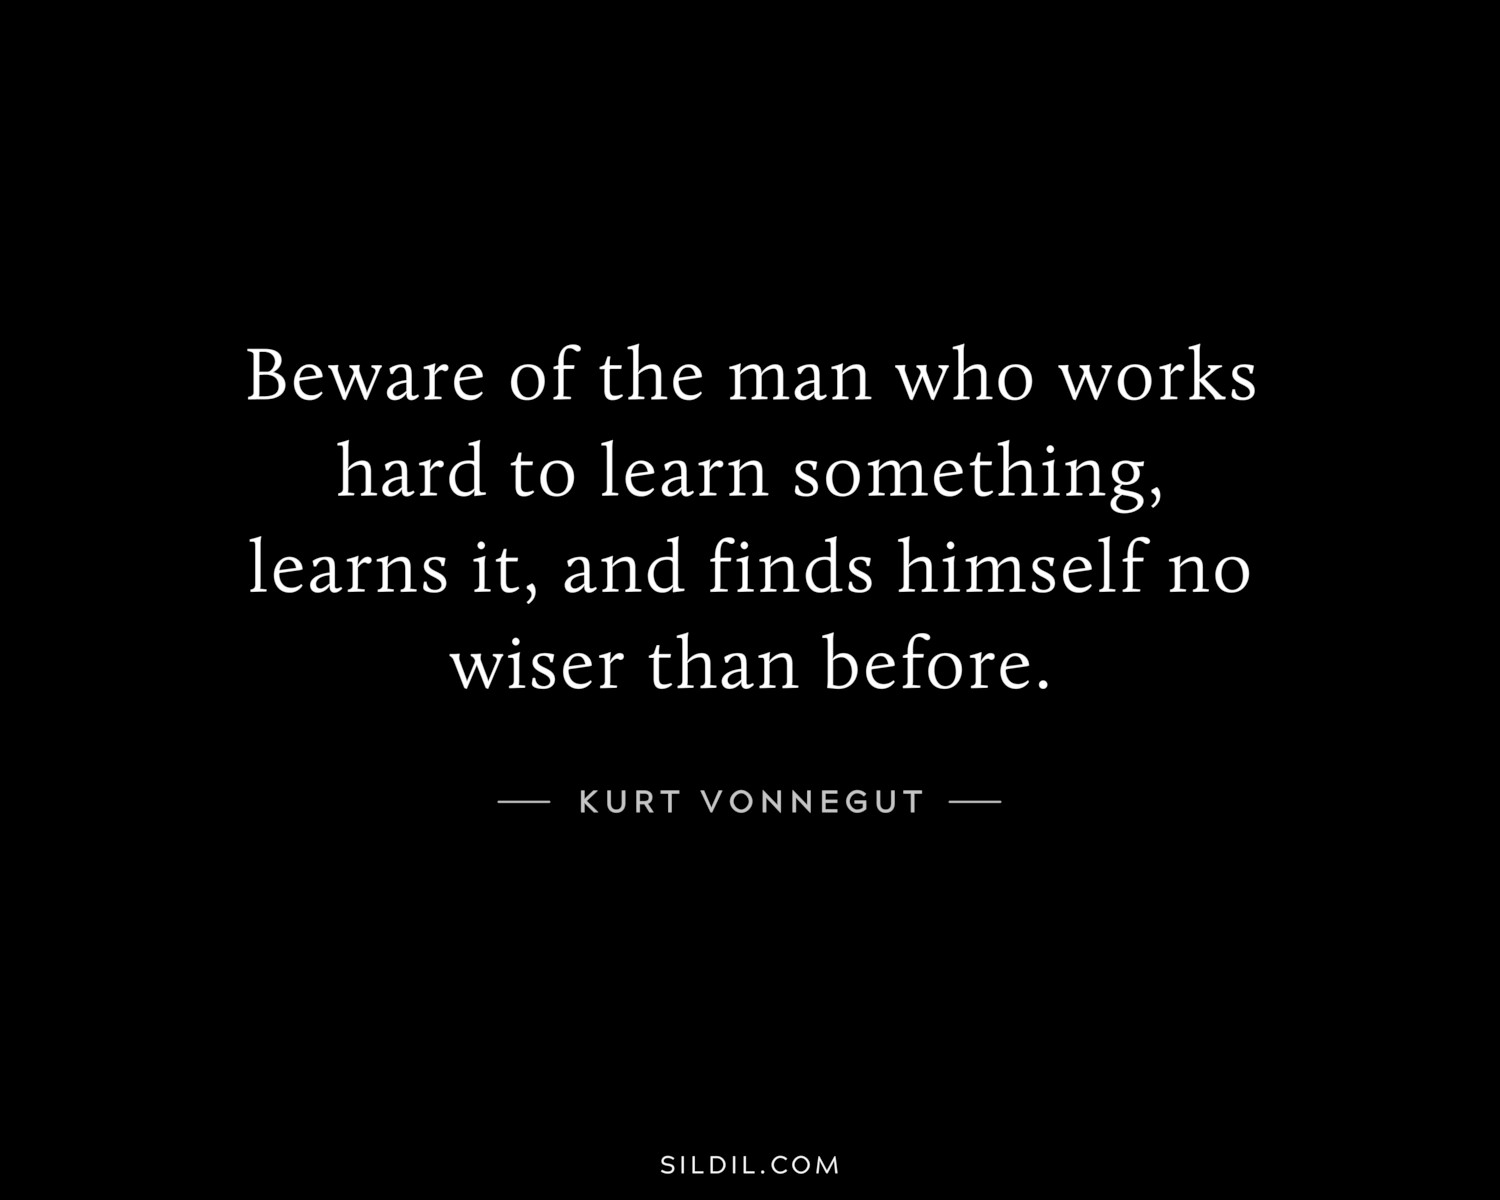 Beware of the man who works hard to learn something, learns it, and finds himself no wiser than before.